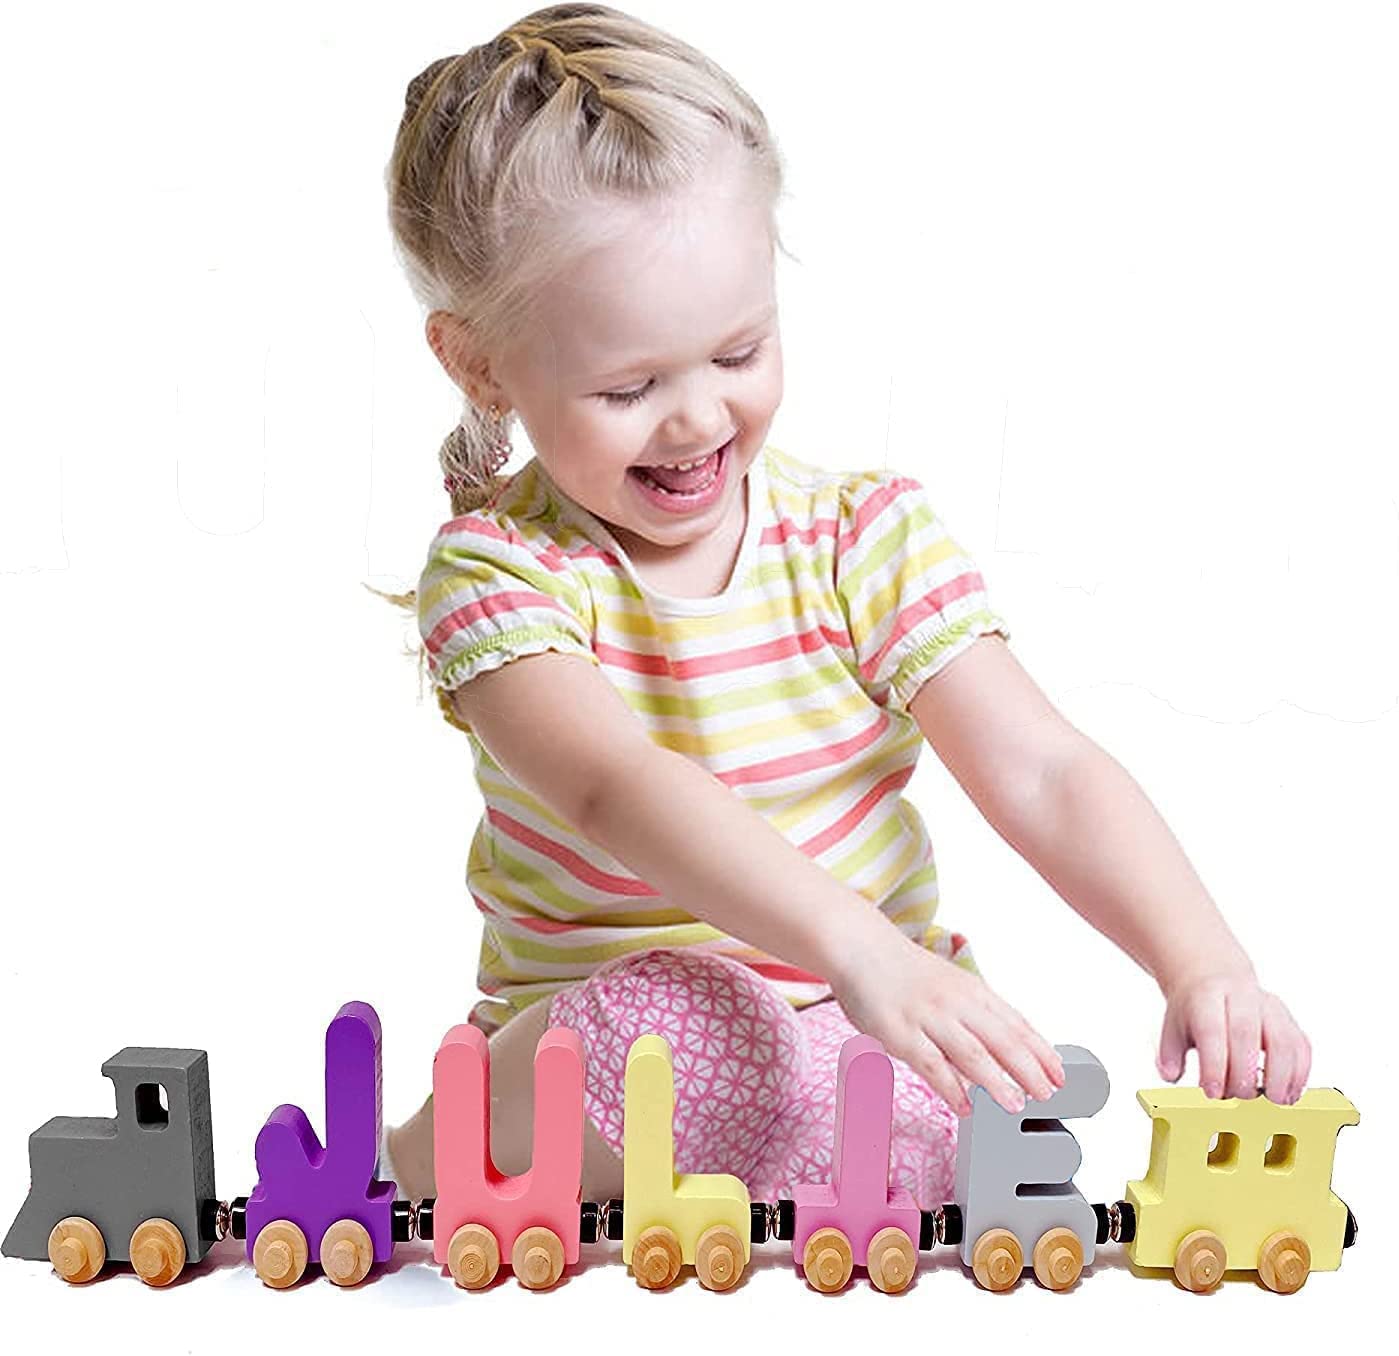 9 Letter Train Wooden Perosnalized Name Letters Includes Train & Wagon Letters Puzzle Includes Train & Wagon Free